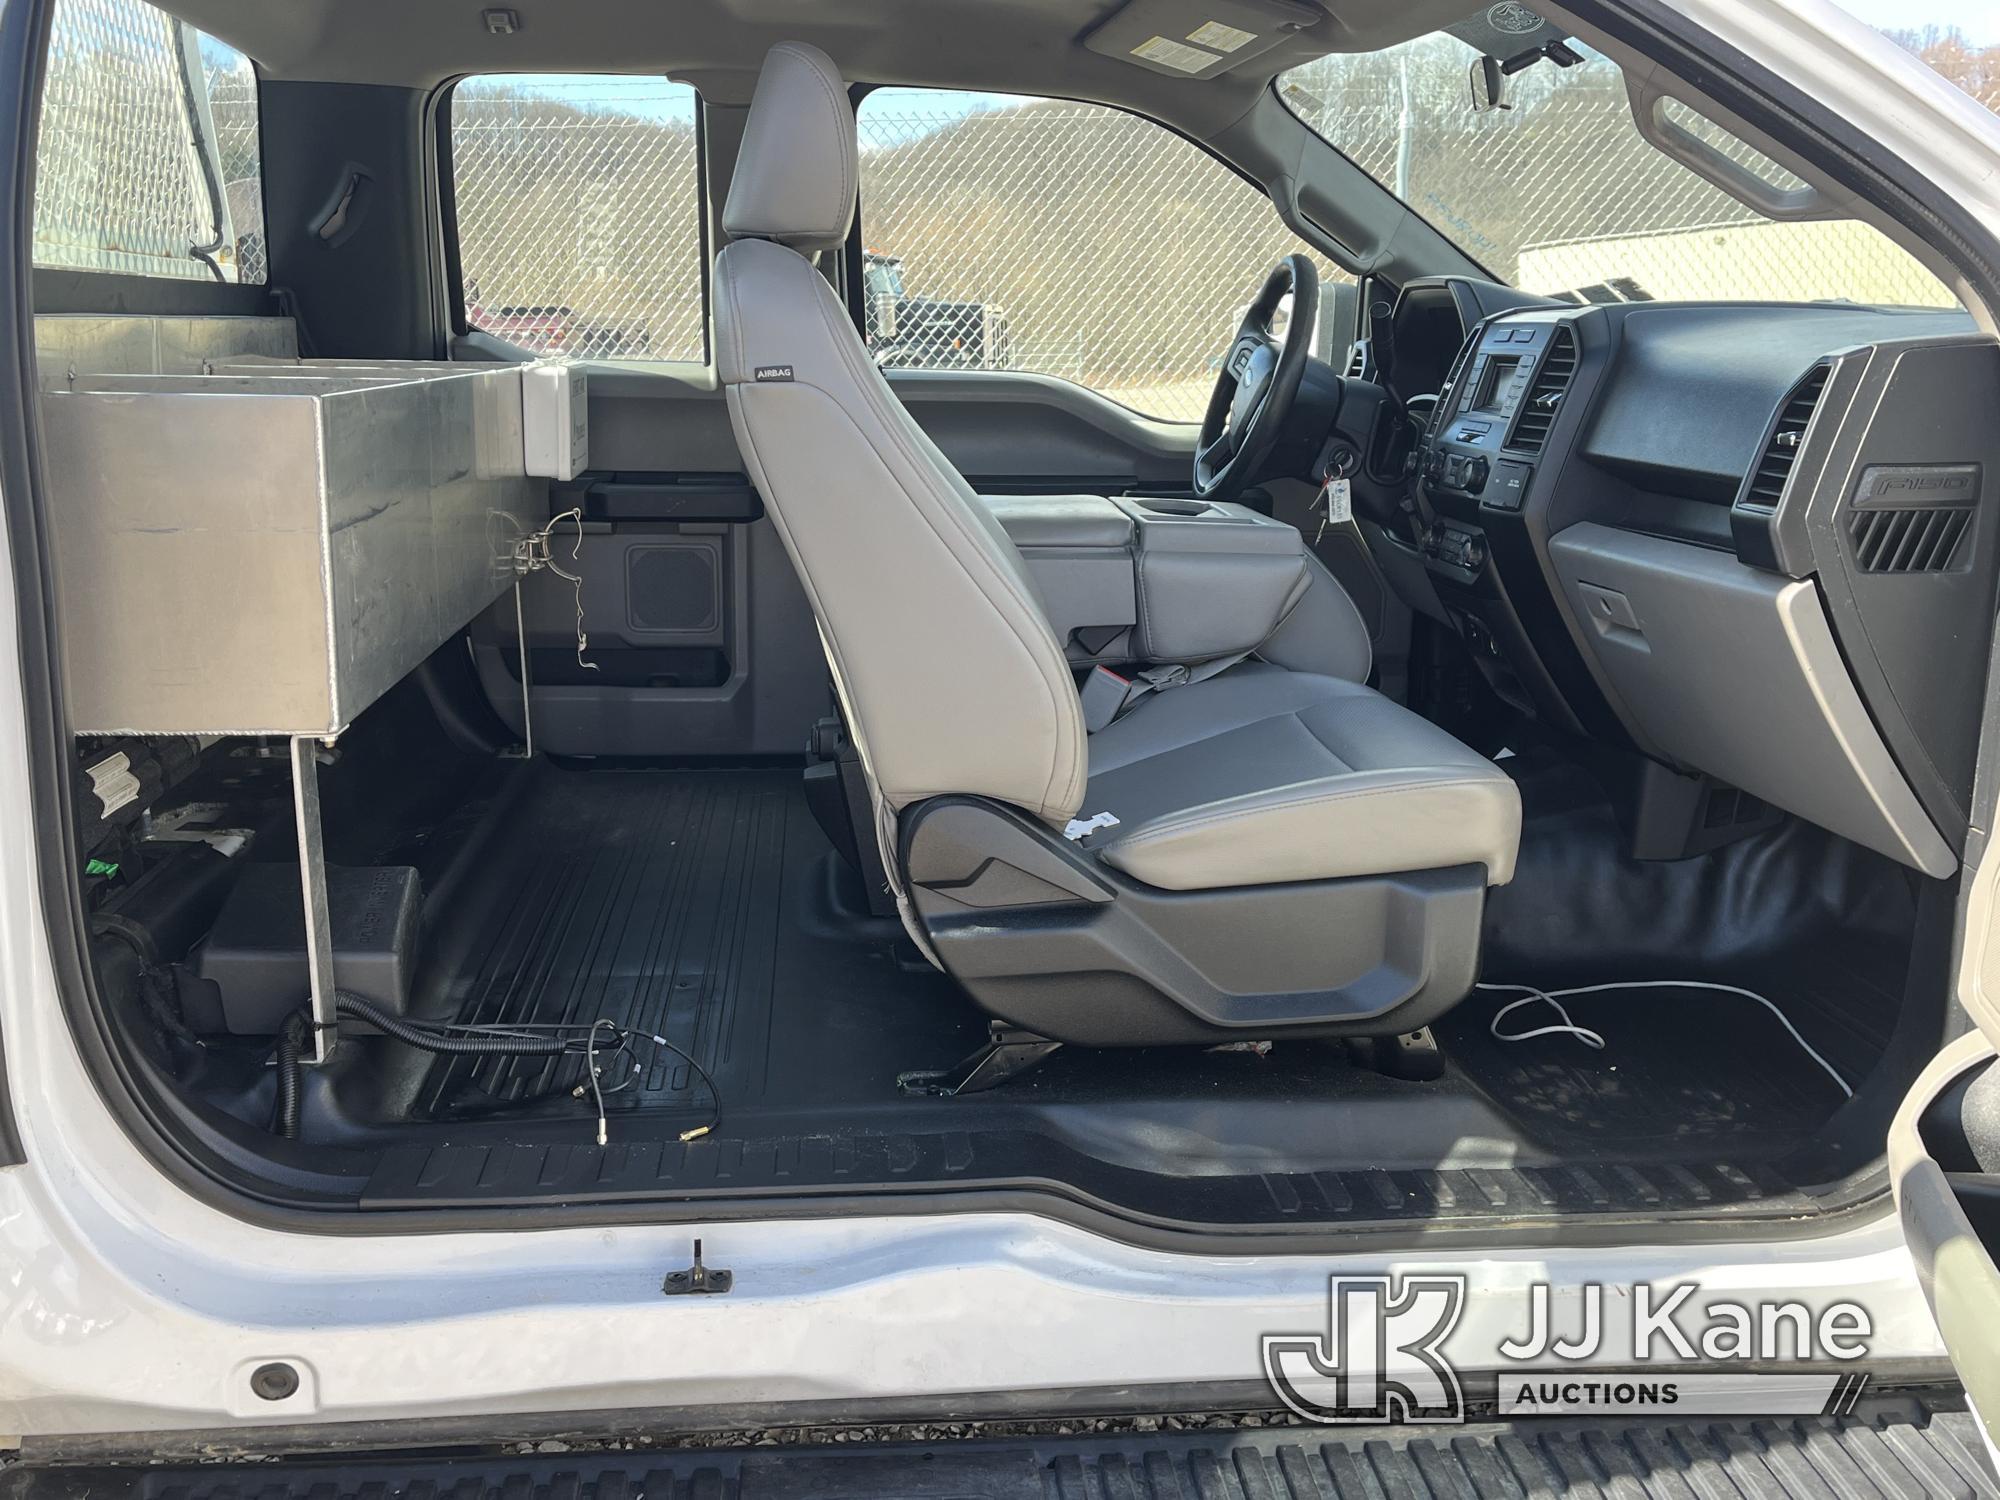 (Smock, PA) 2017 Ford F150 4x4 Extended-Cab Pickup Truck Runs & Moves, Rust, Paint & Body Damage